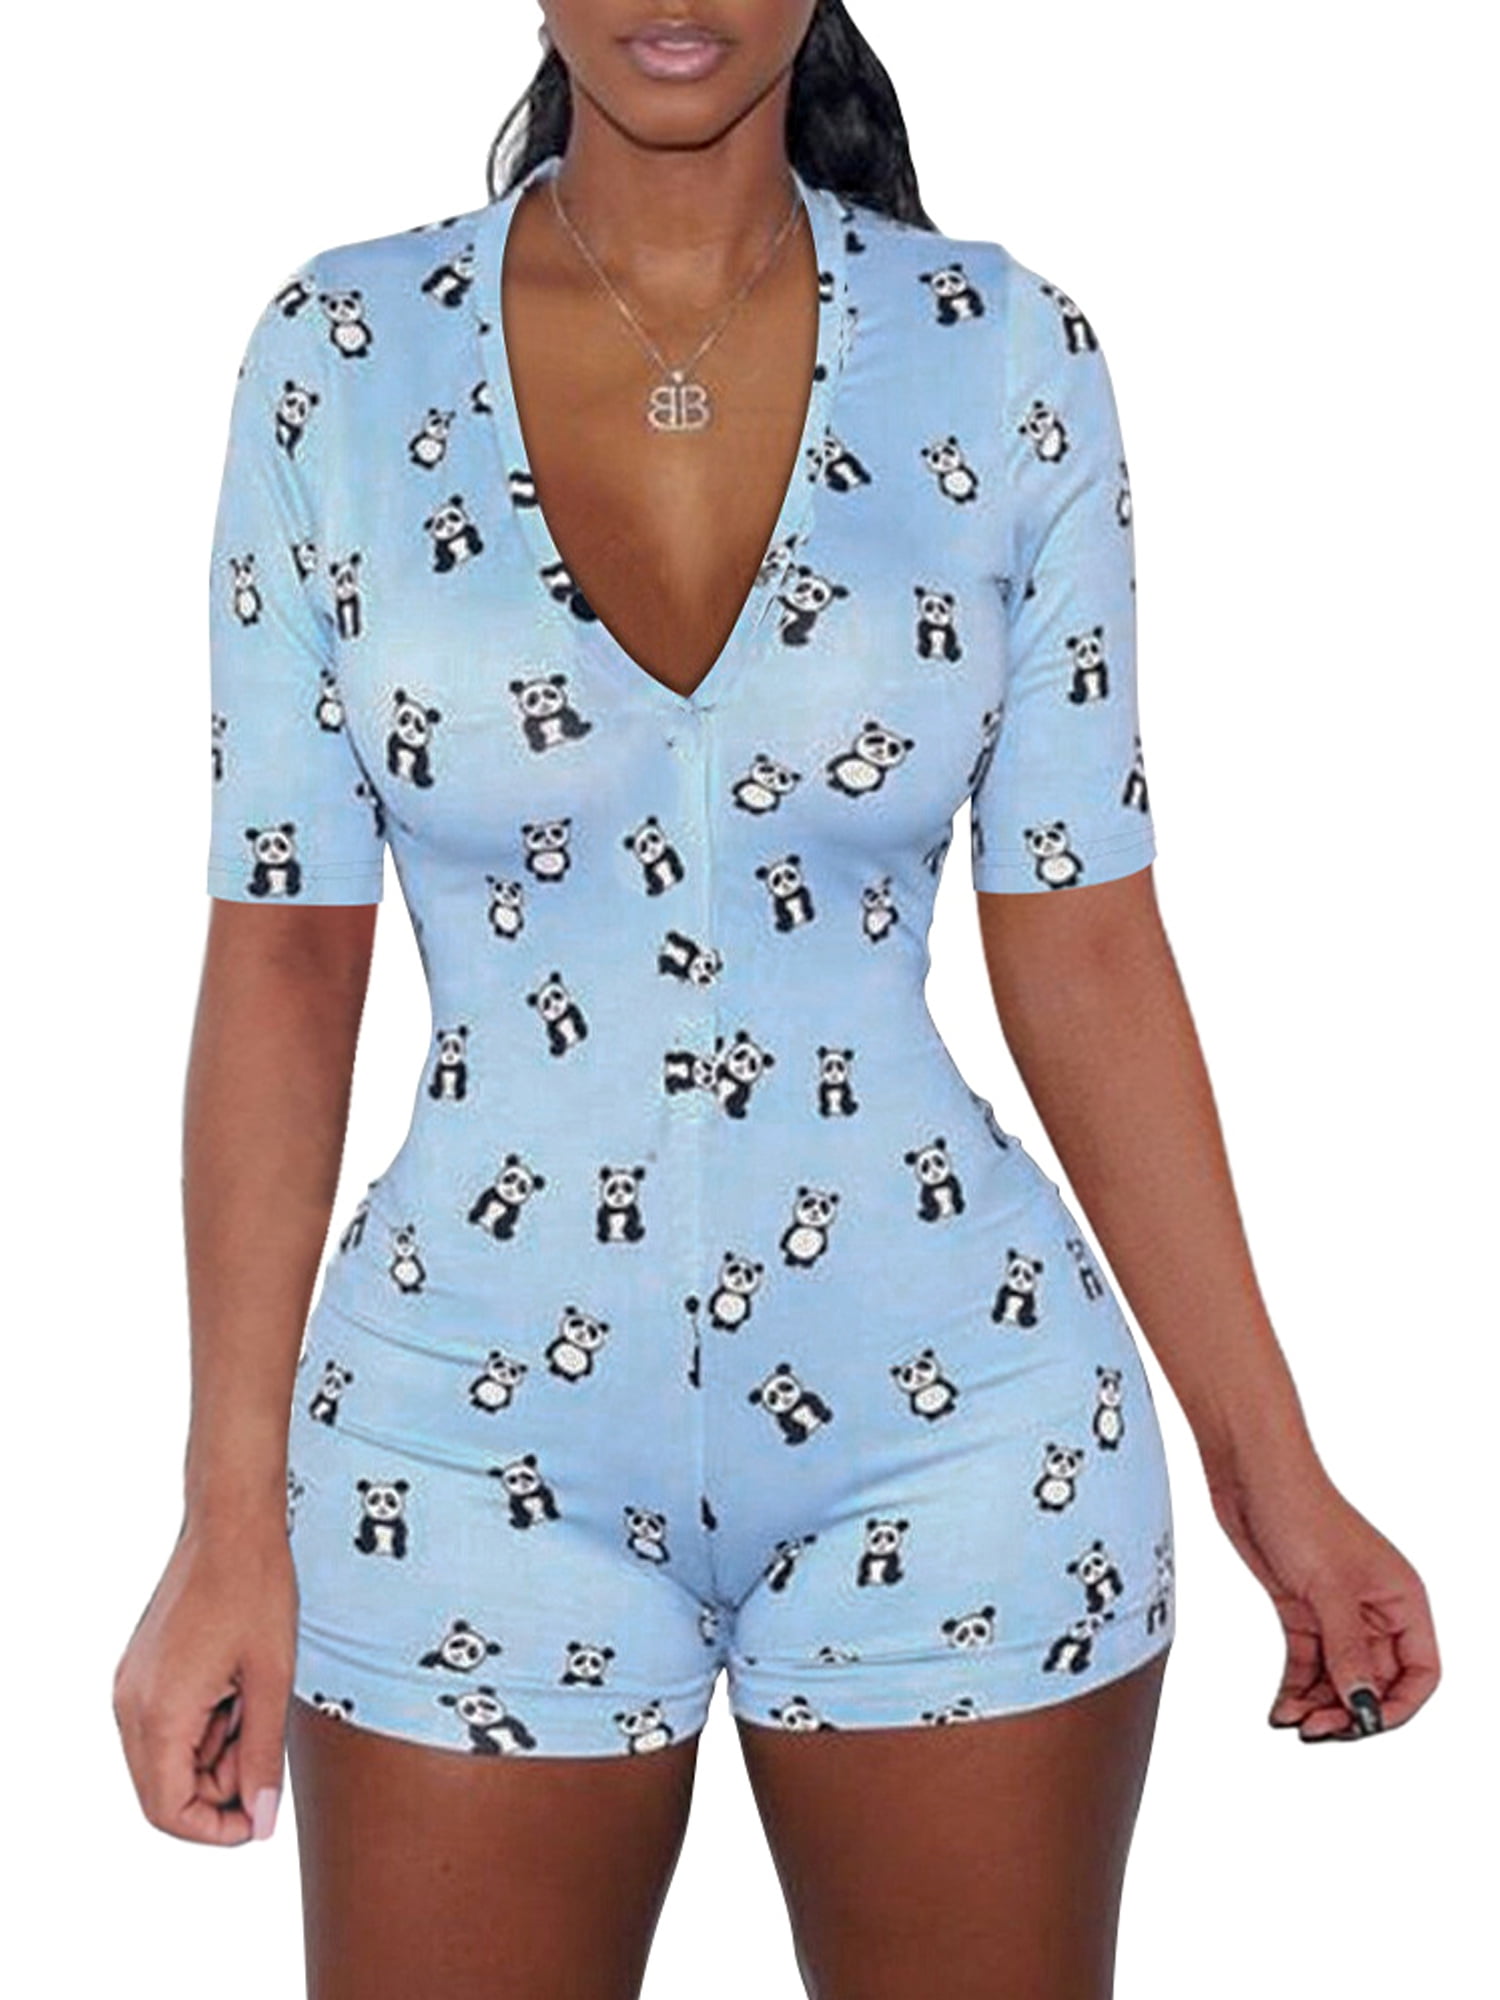 Women V Neck Short Bodycon Rompers Overall Homewear Outfits - Walmart.com